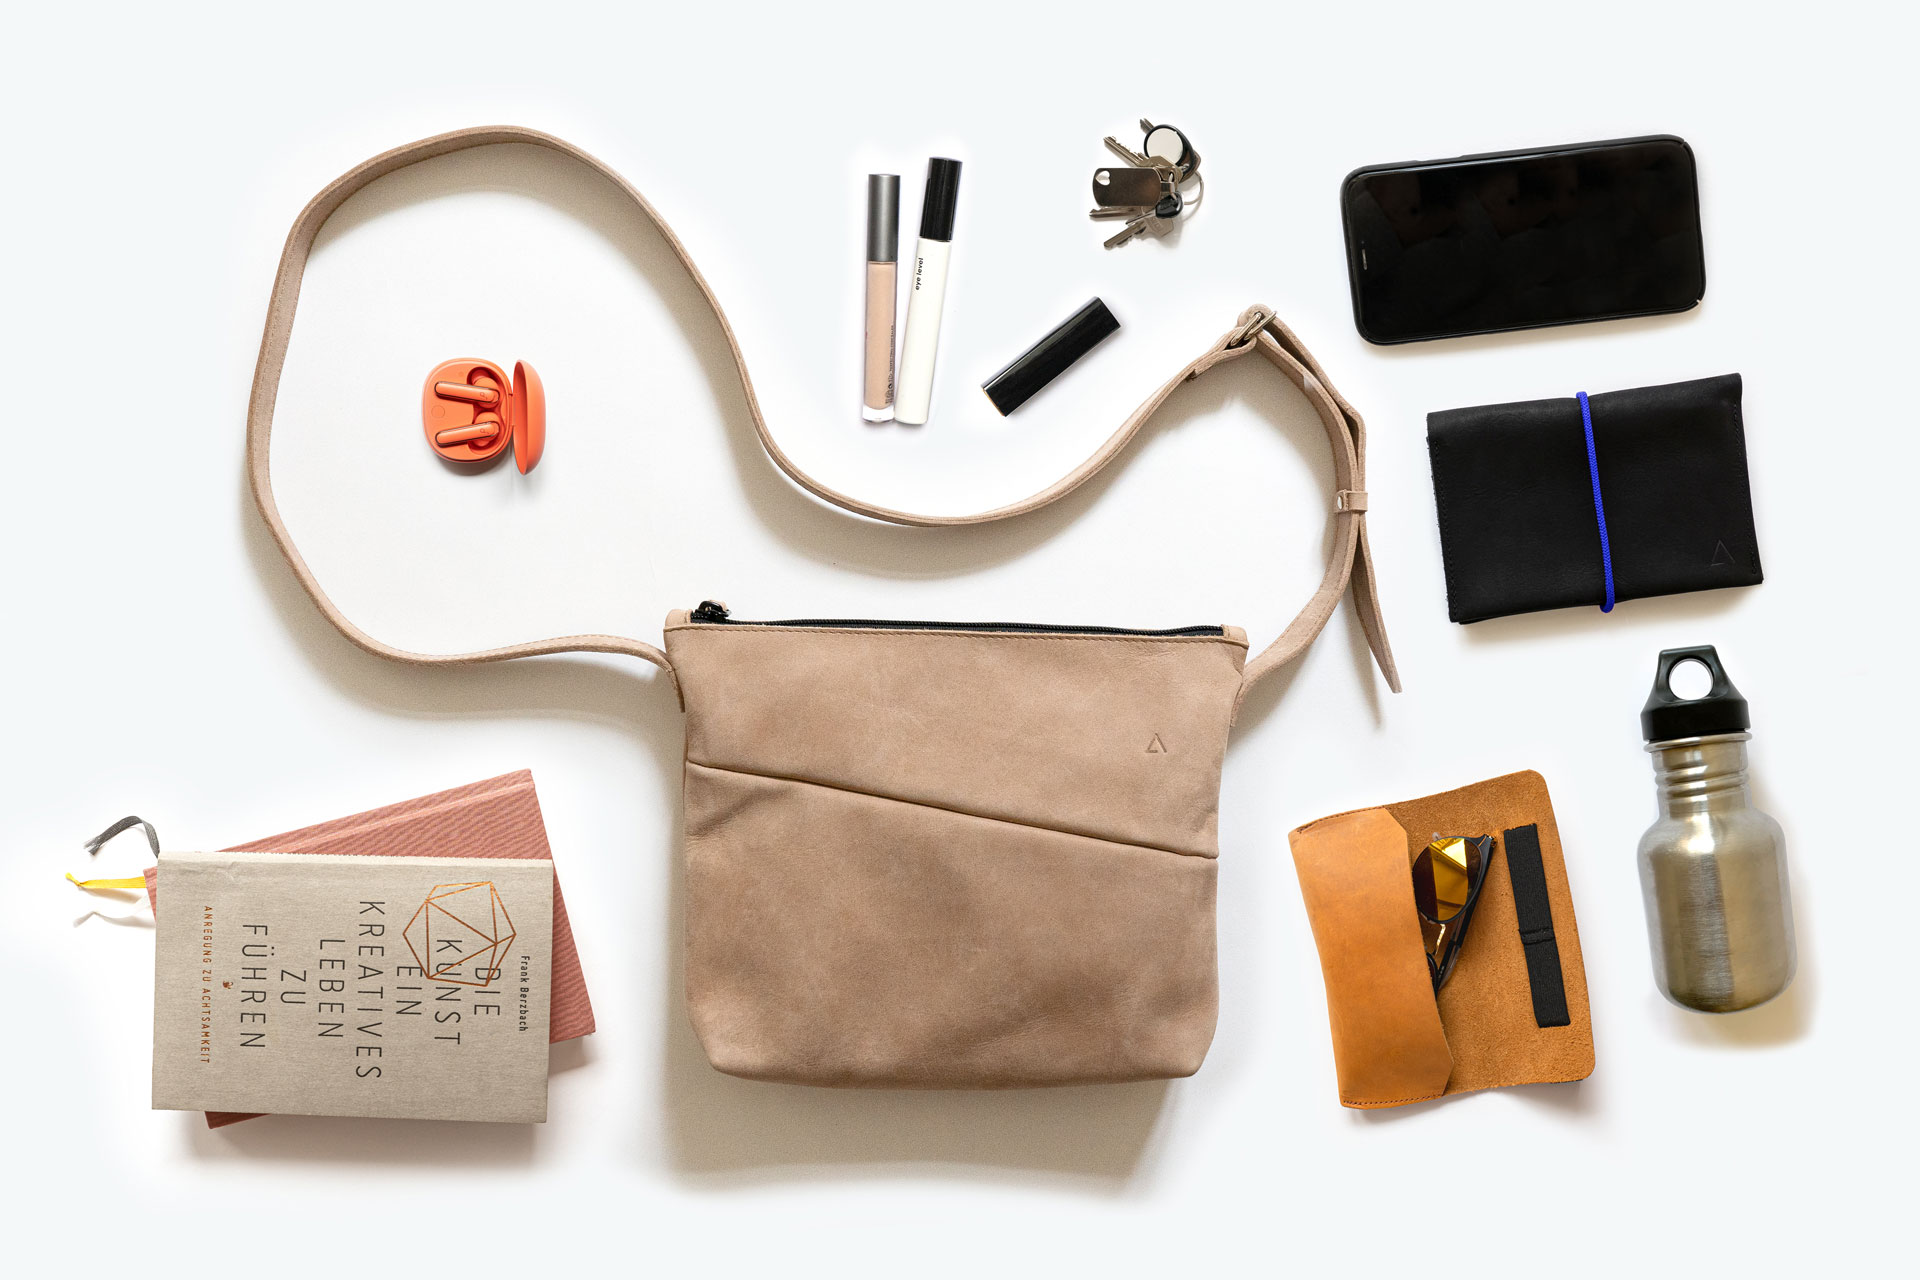 IDA is a small shoulder bag for everyday things like cell phone, keys and wallet. But there is also room for a book or a small water bottle.